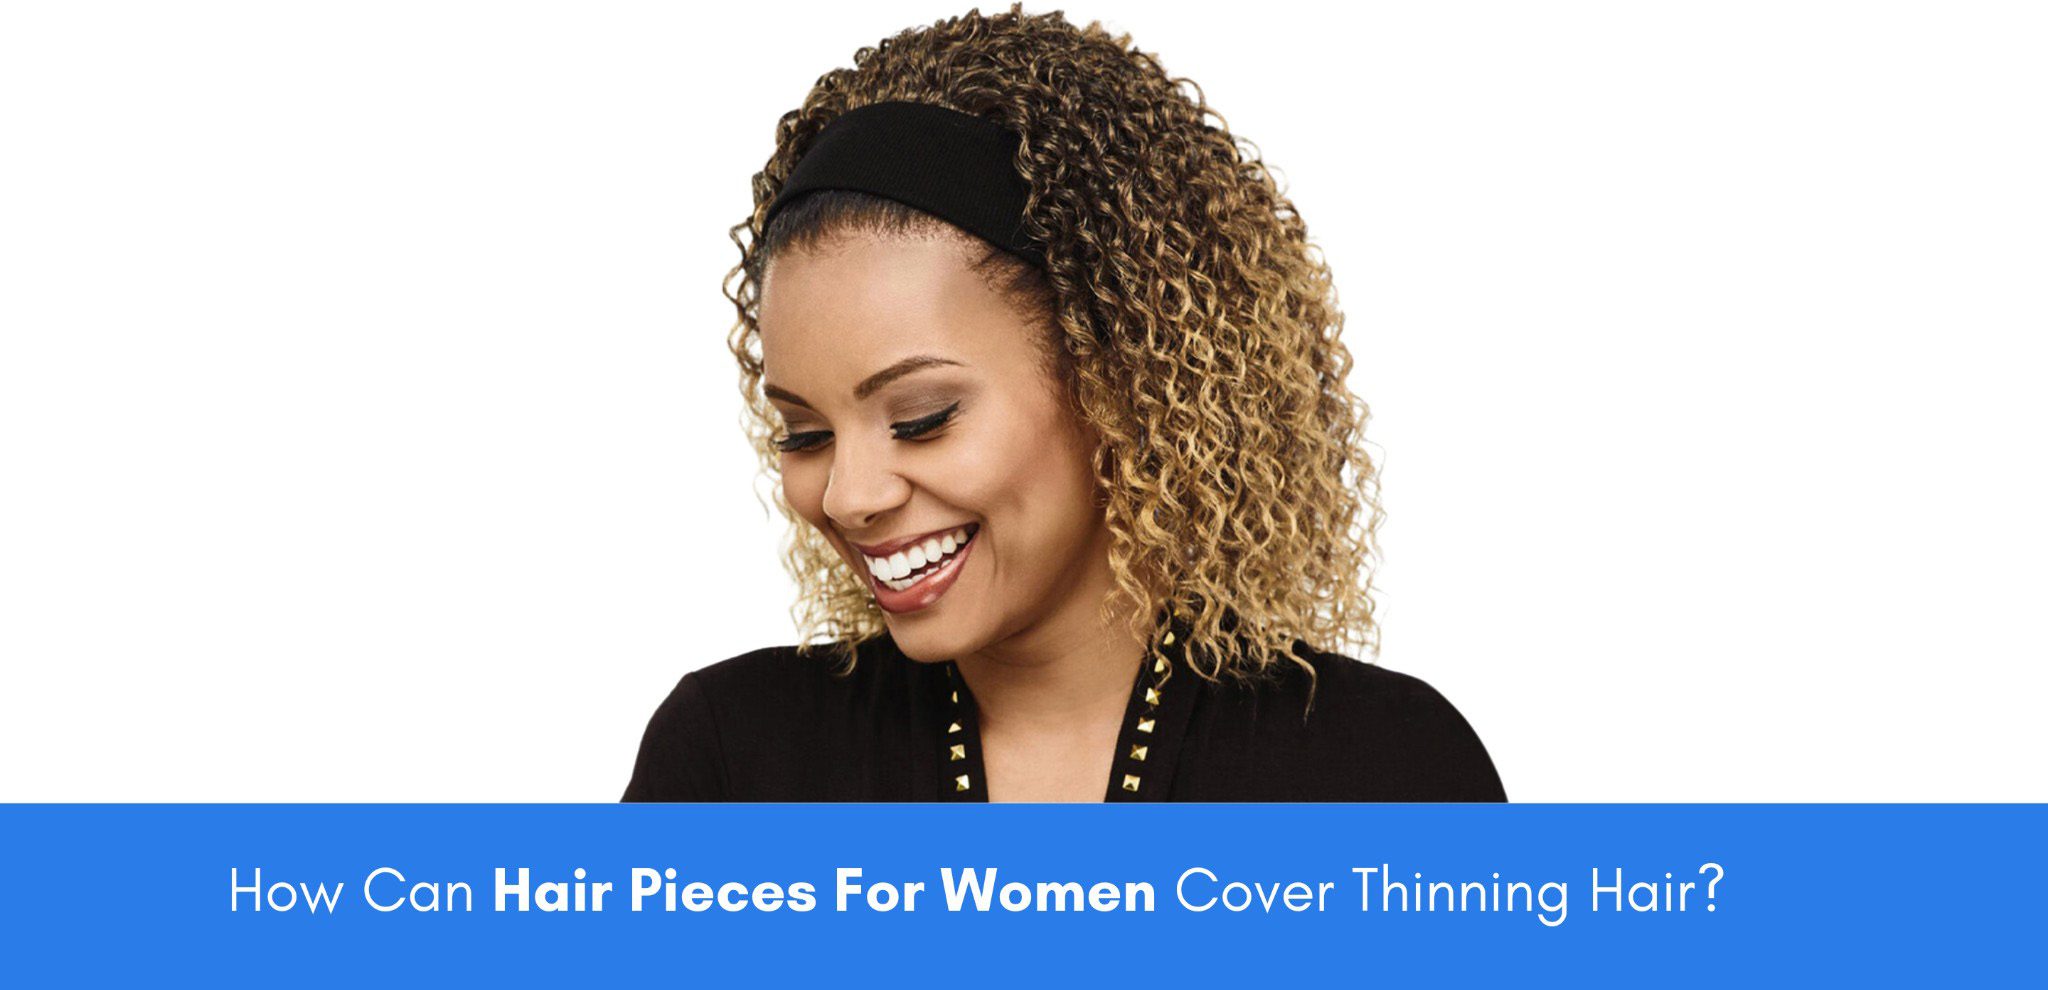 How Can Hair Pieces For Women Cover Thinning Hair?